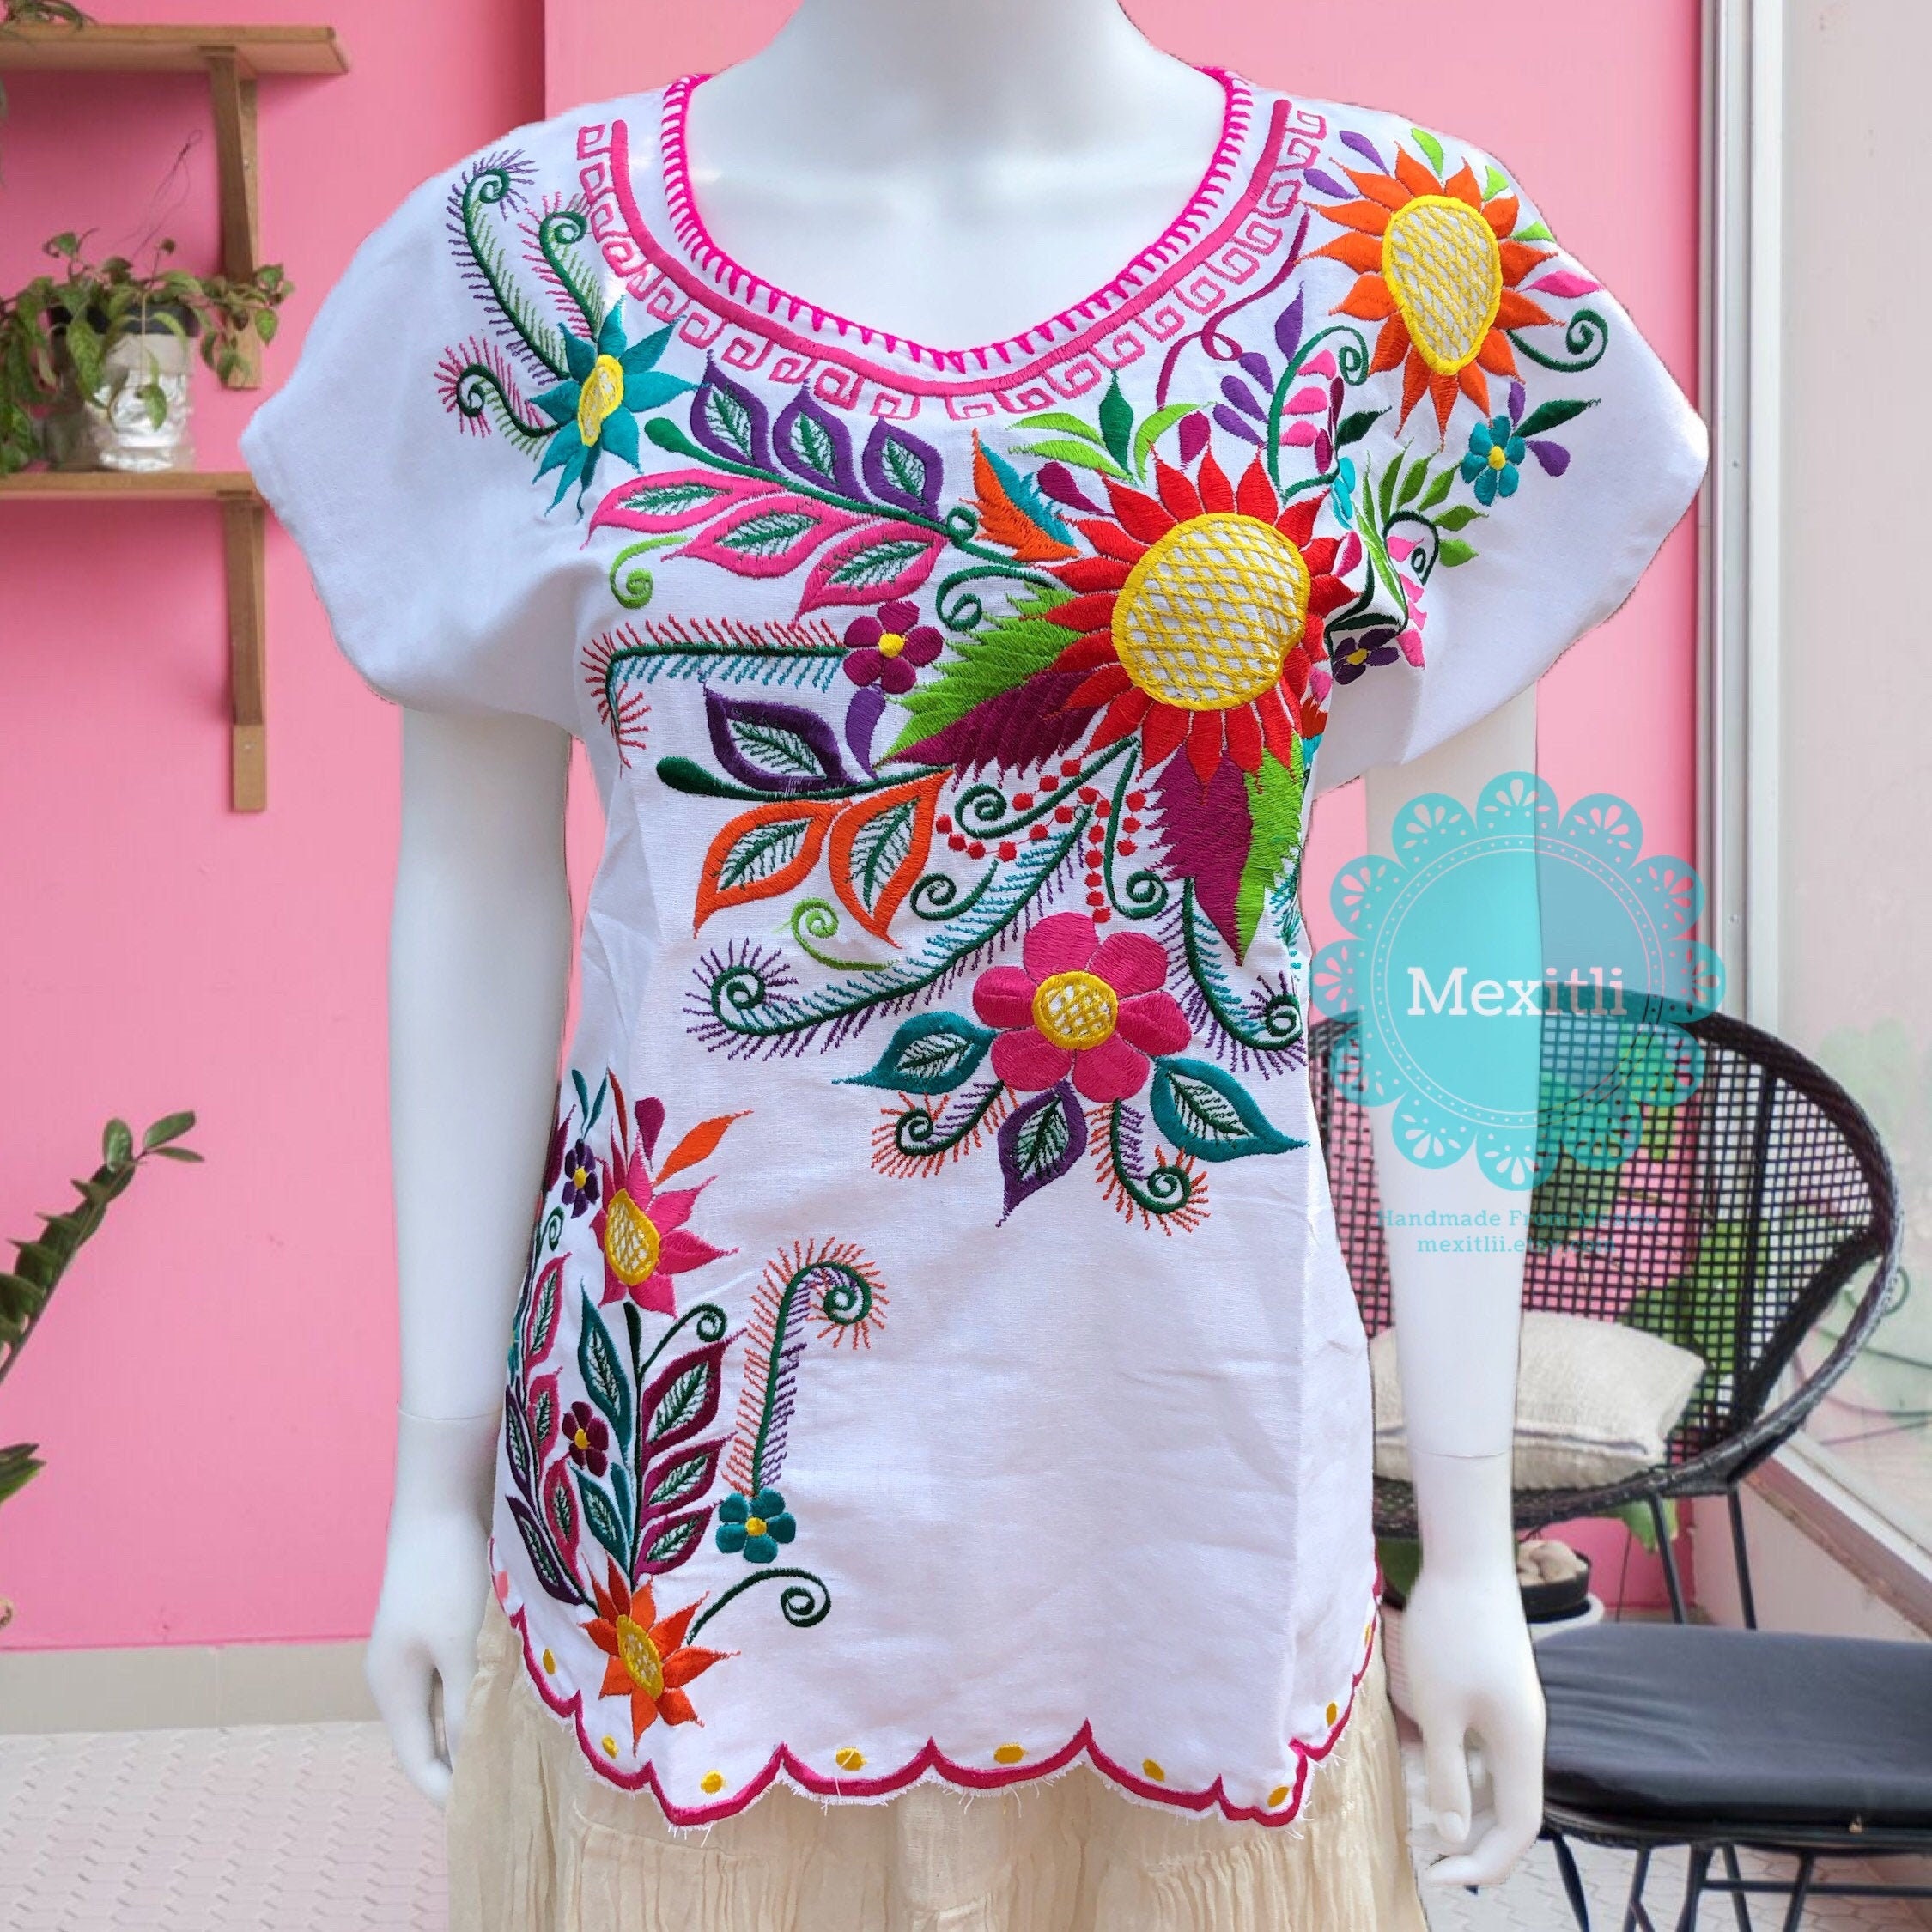 Handmade Womens Embroidered Mexican Blouse Sizes Medium Large XL Blusa Mexicana 